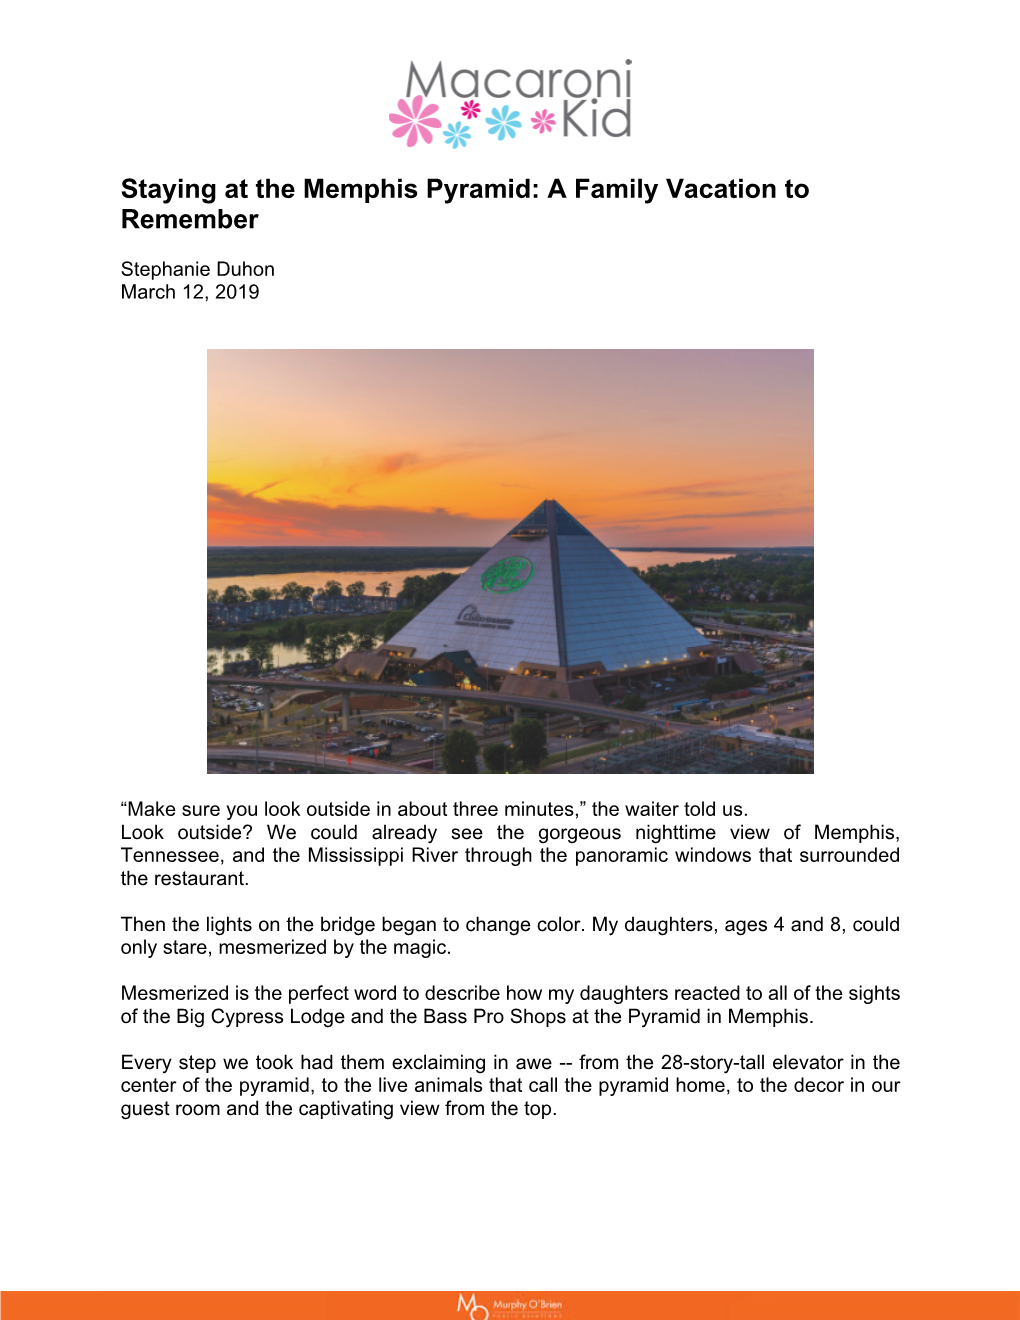 Staying at the Memphis Pyramid: a Family Vacation to Remember